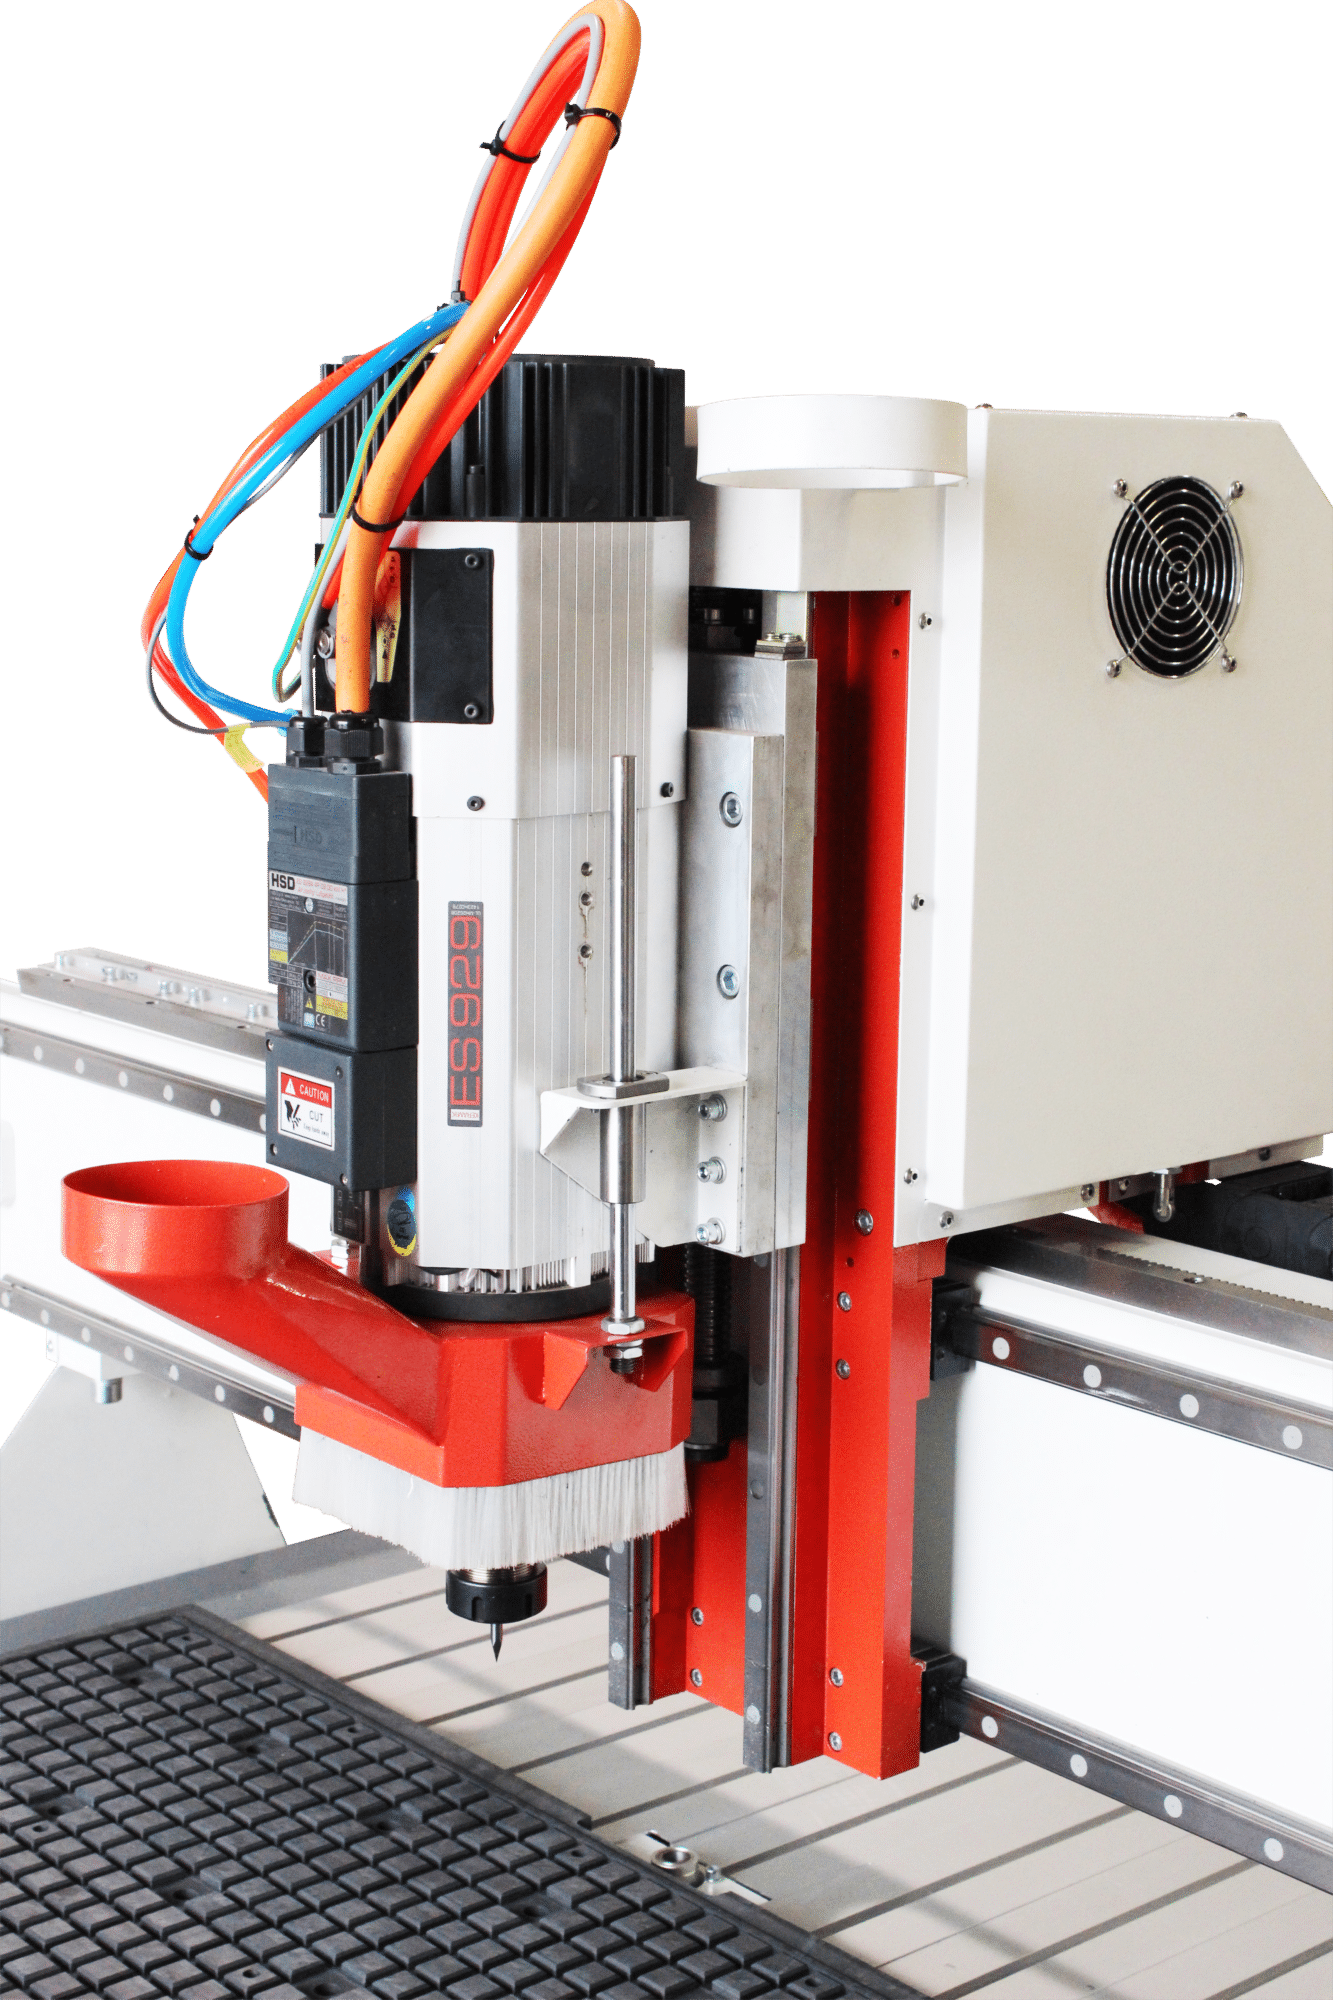 B2 CNC Router Spindle